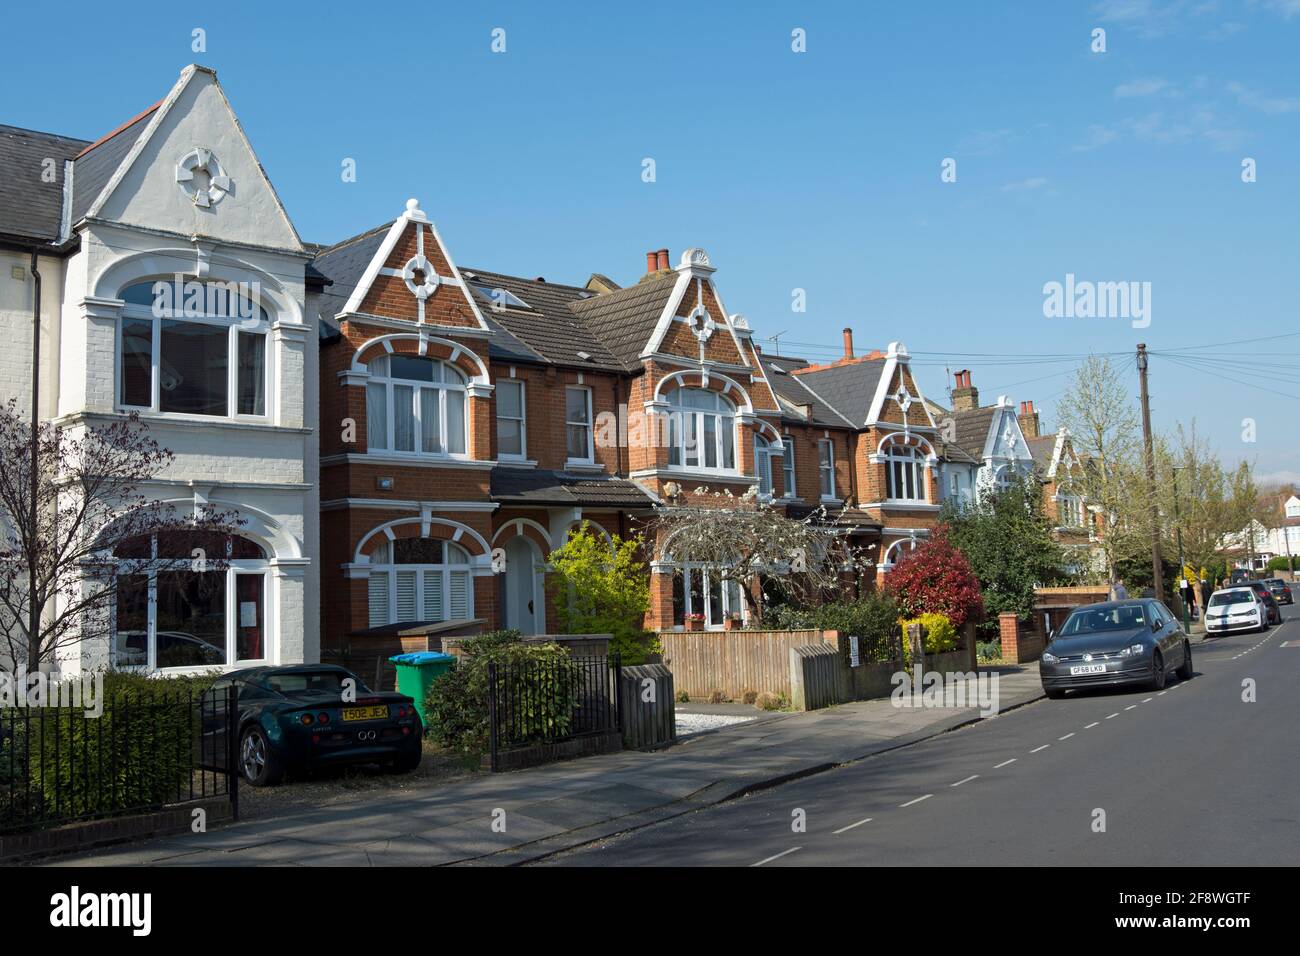 row of semi-detached victorian houses in teddington, middlesex, england Stock Photo